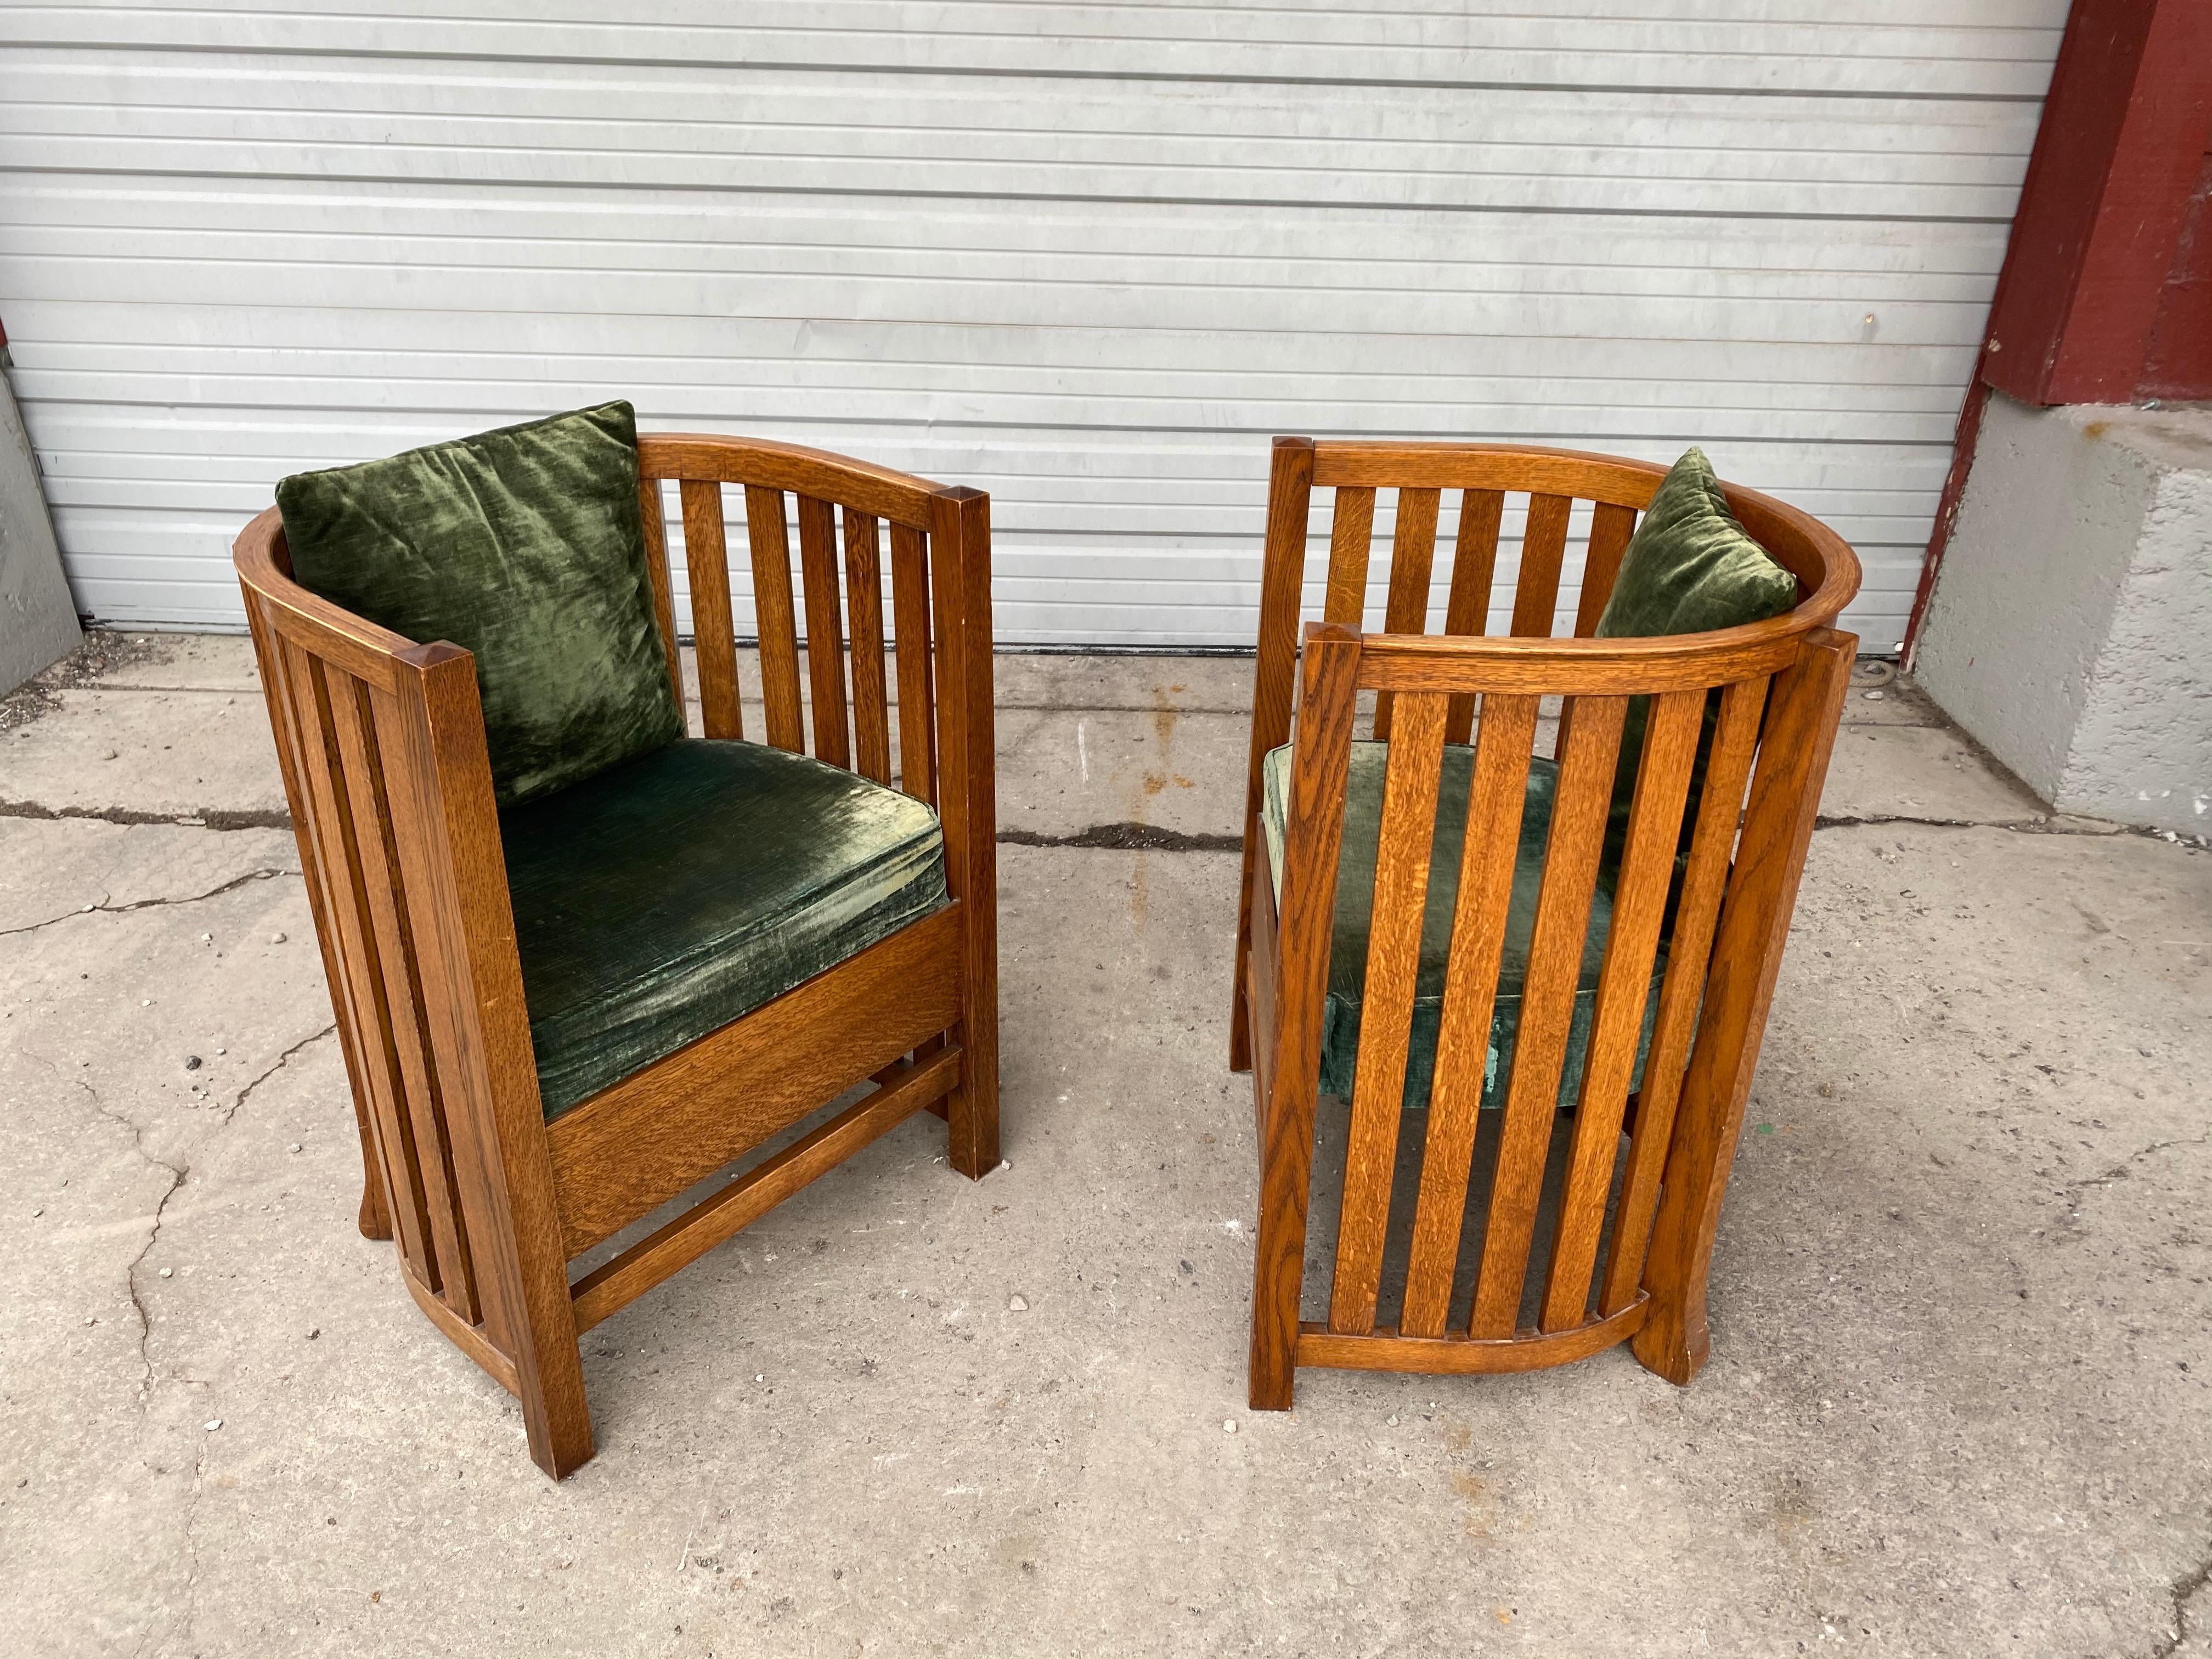 American Classic Pair of Barrel Chairs, after Frank Lloyd Wright, attrib. Plail Brothers